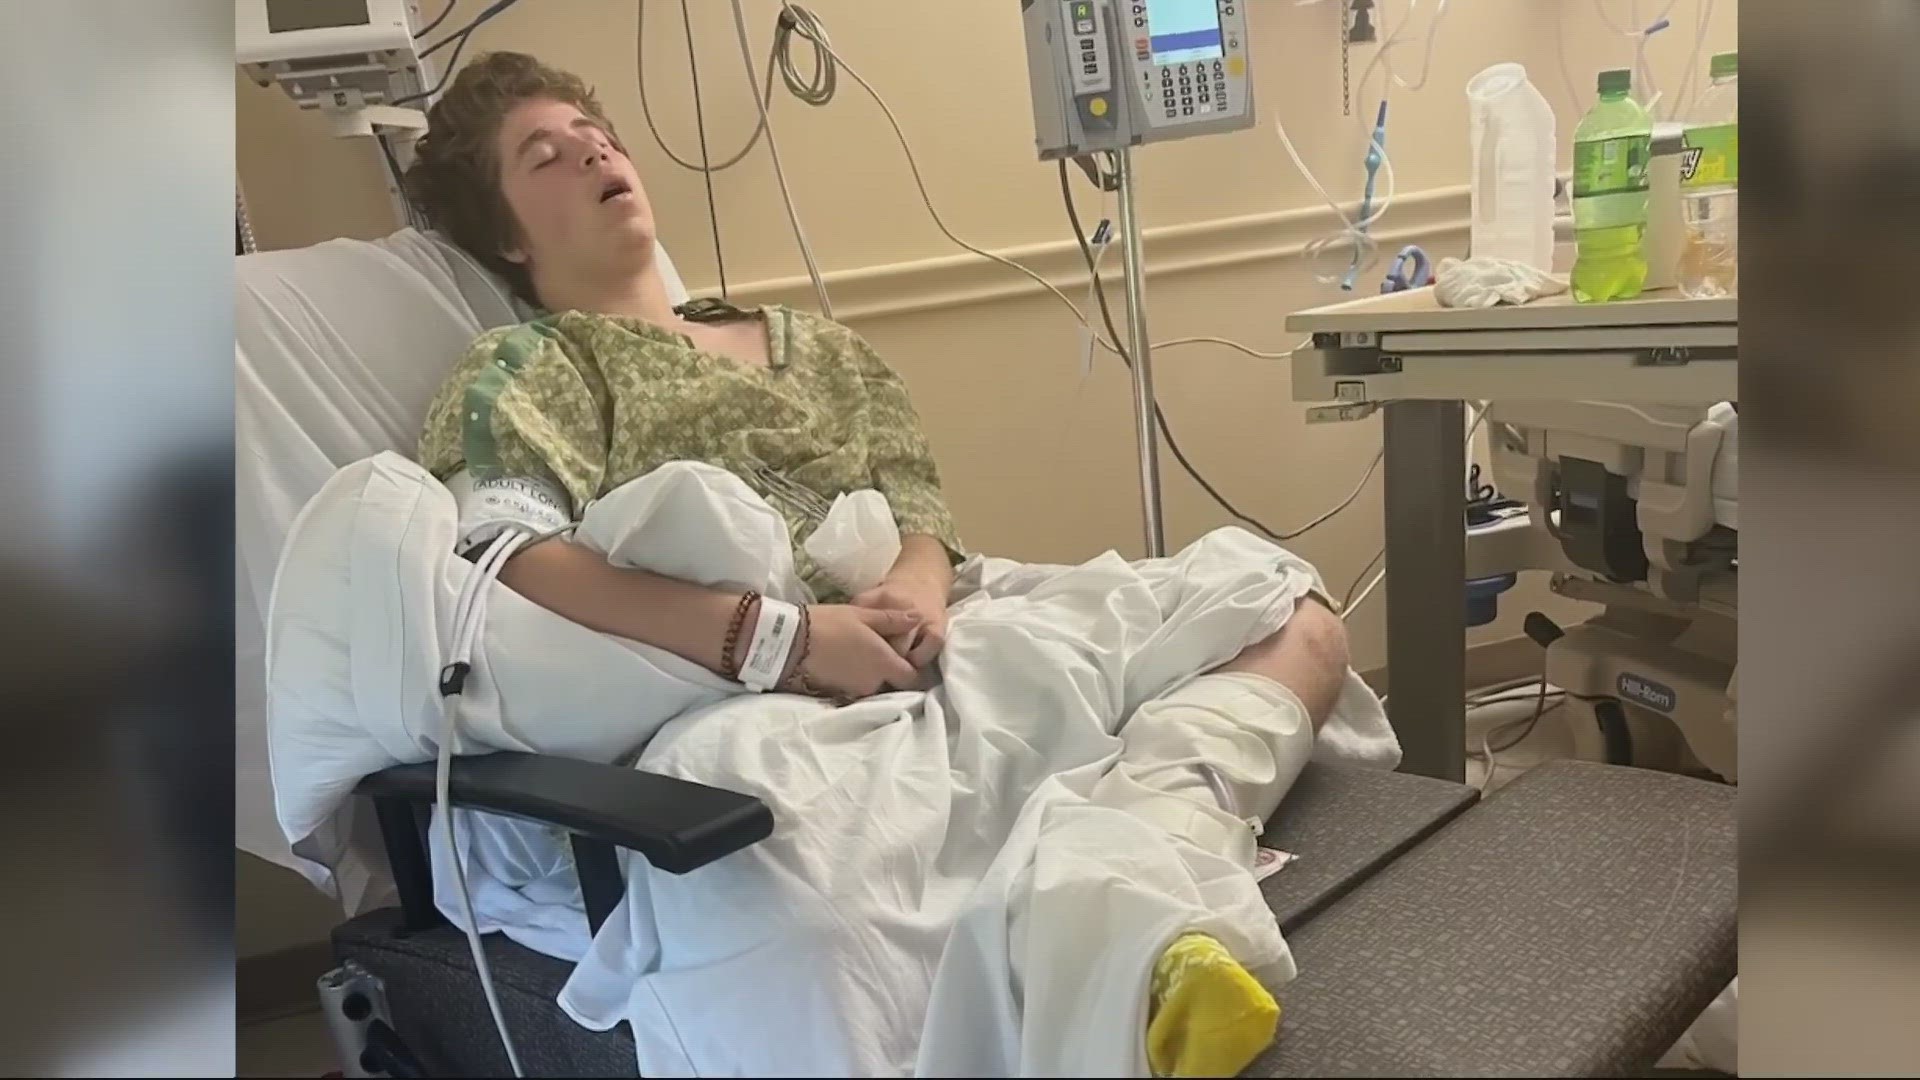 Girl injured in viral high school fight remains in hospital